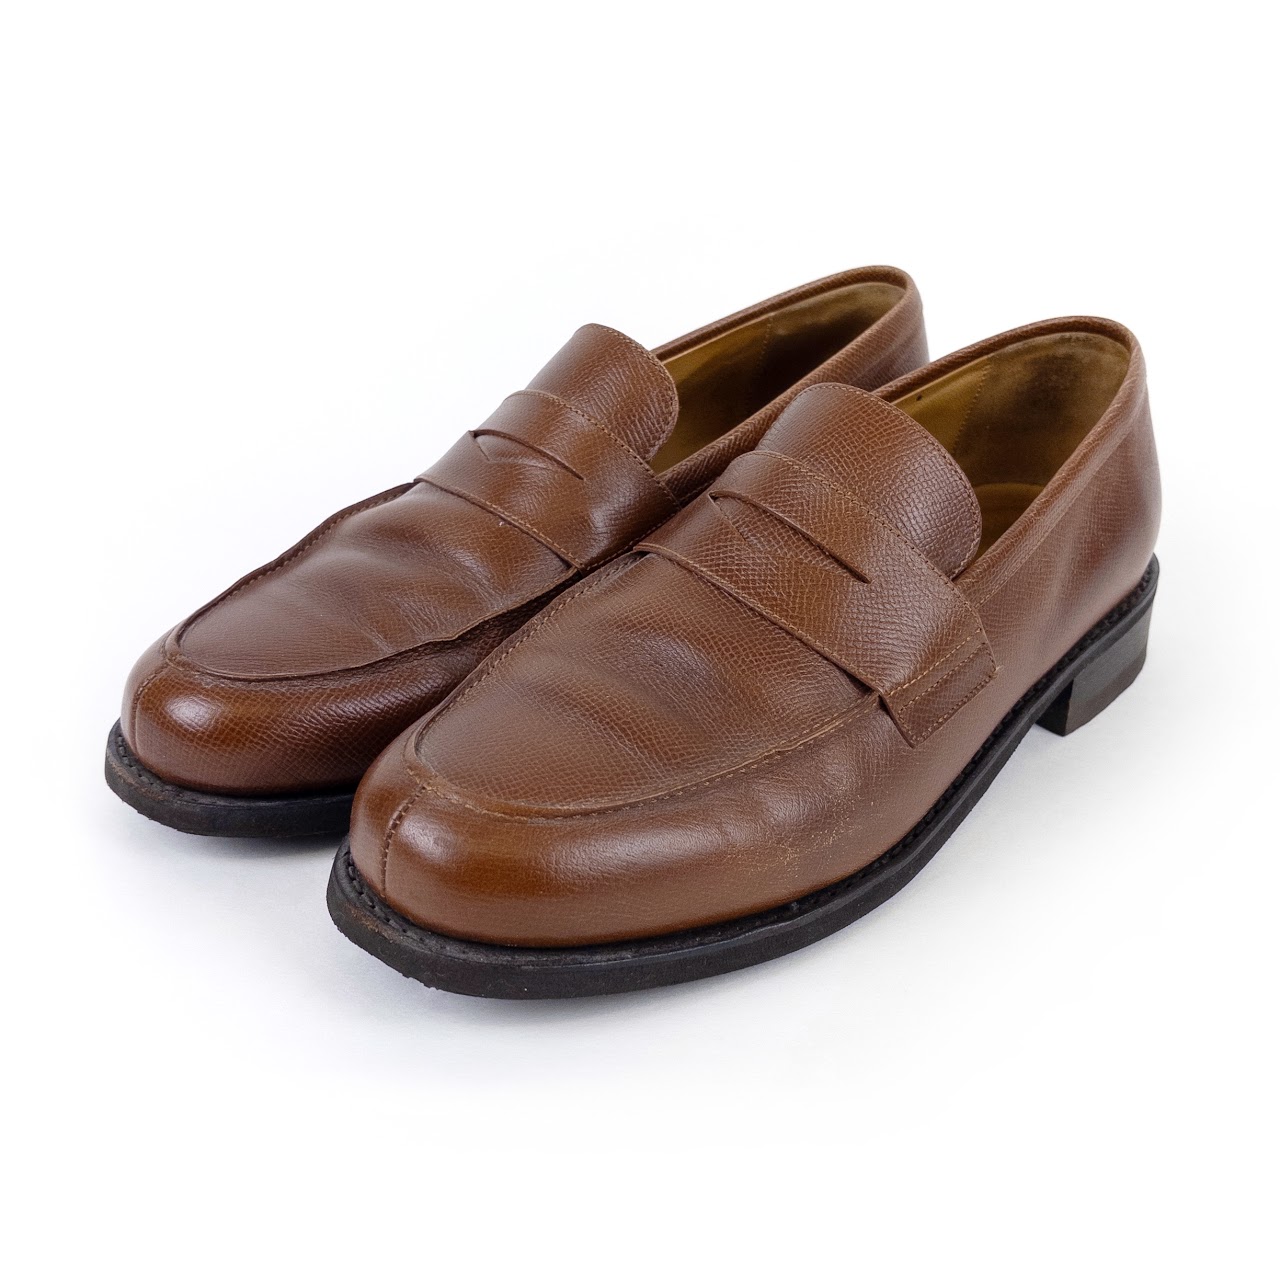 Paraboot Leather Cousu Goodyear Loafers